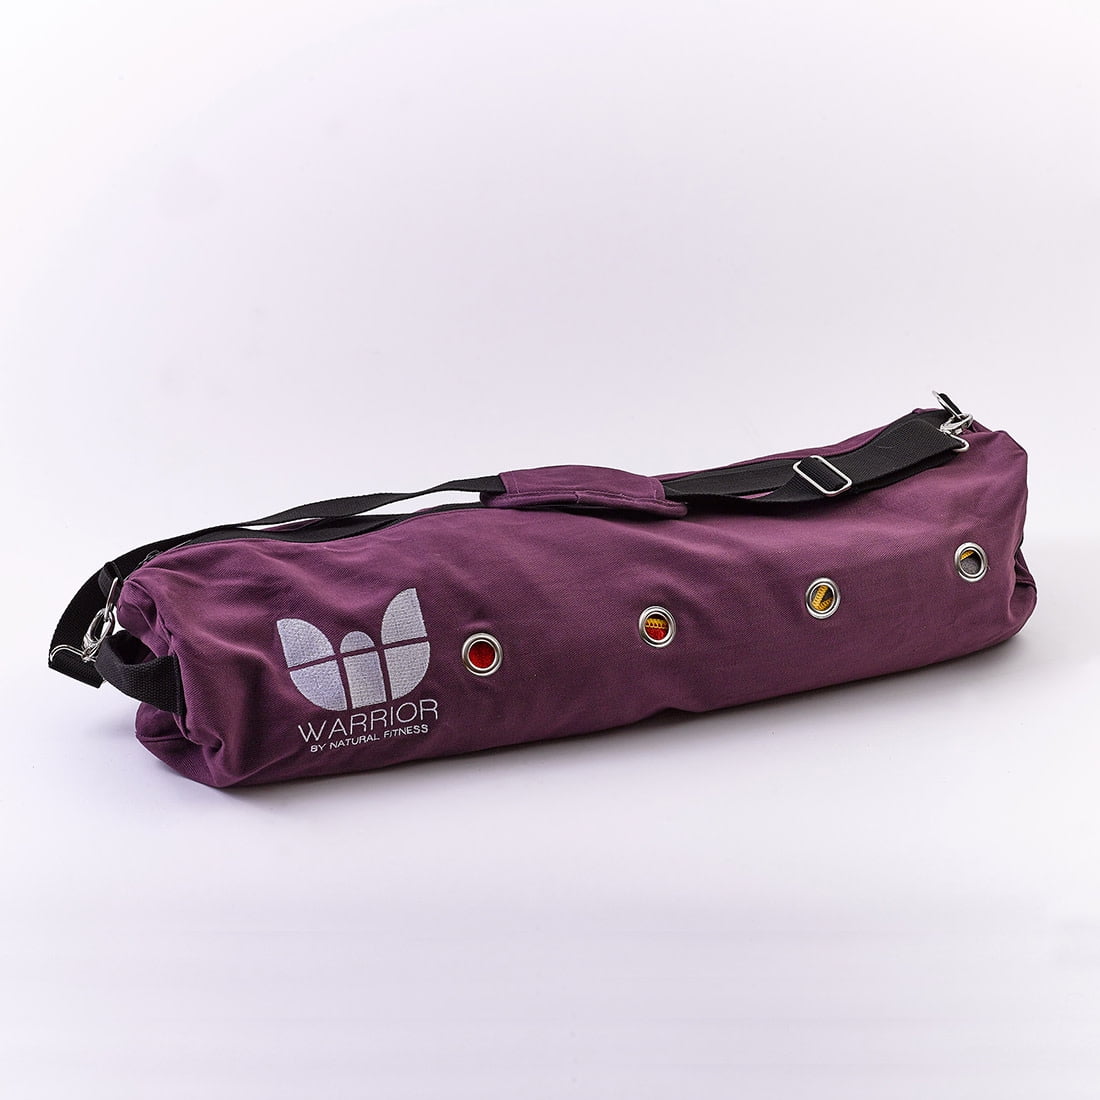 Indian Yoga Bag Gym Exercise Mat Carrier Purple Bags With Shoulder Strap Throw 